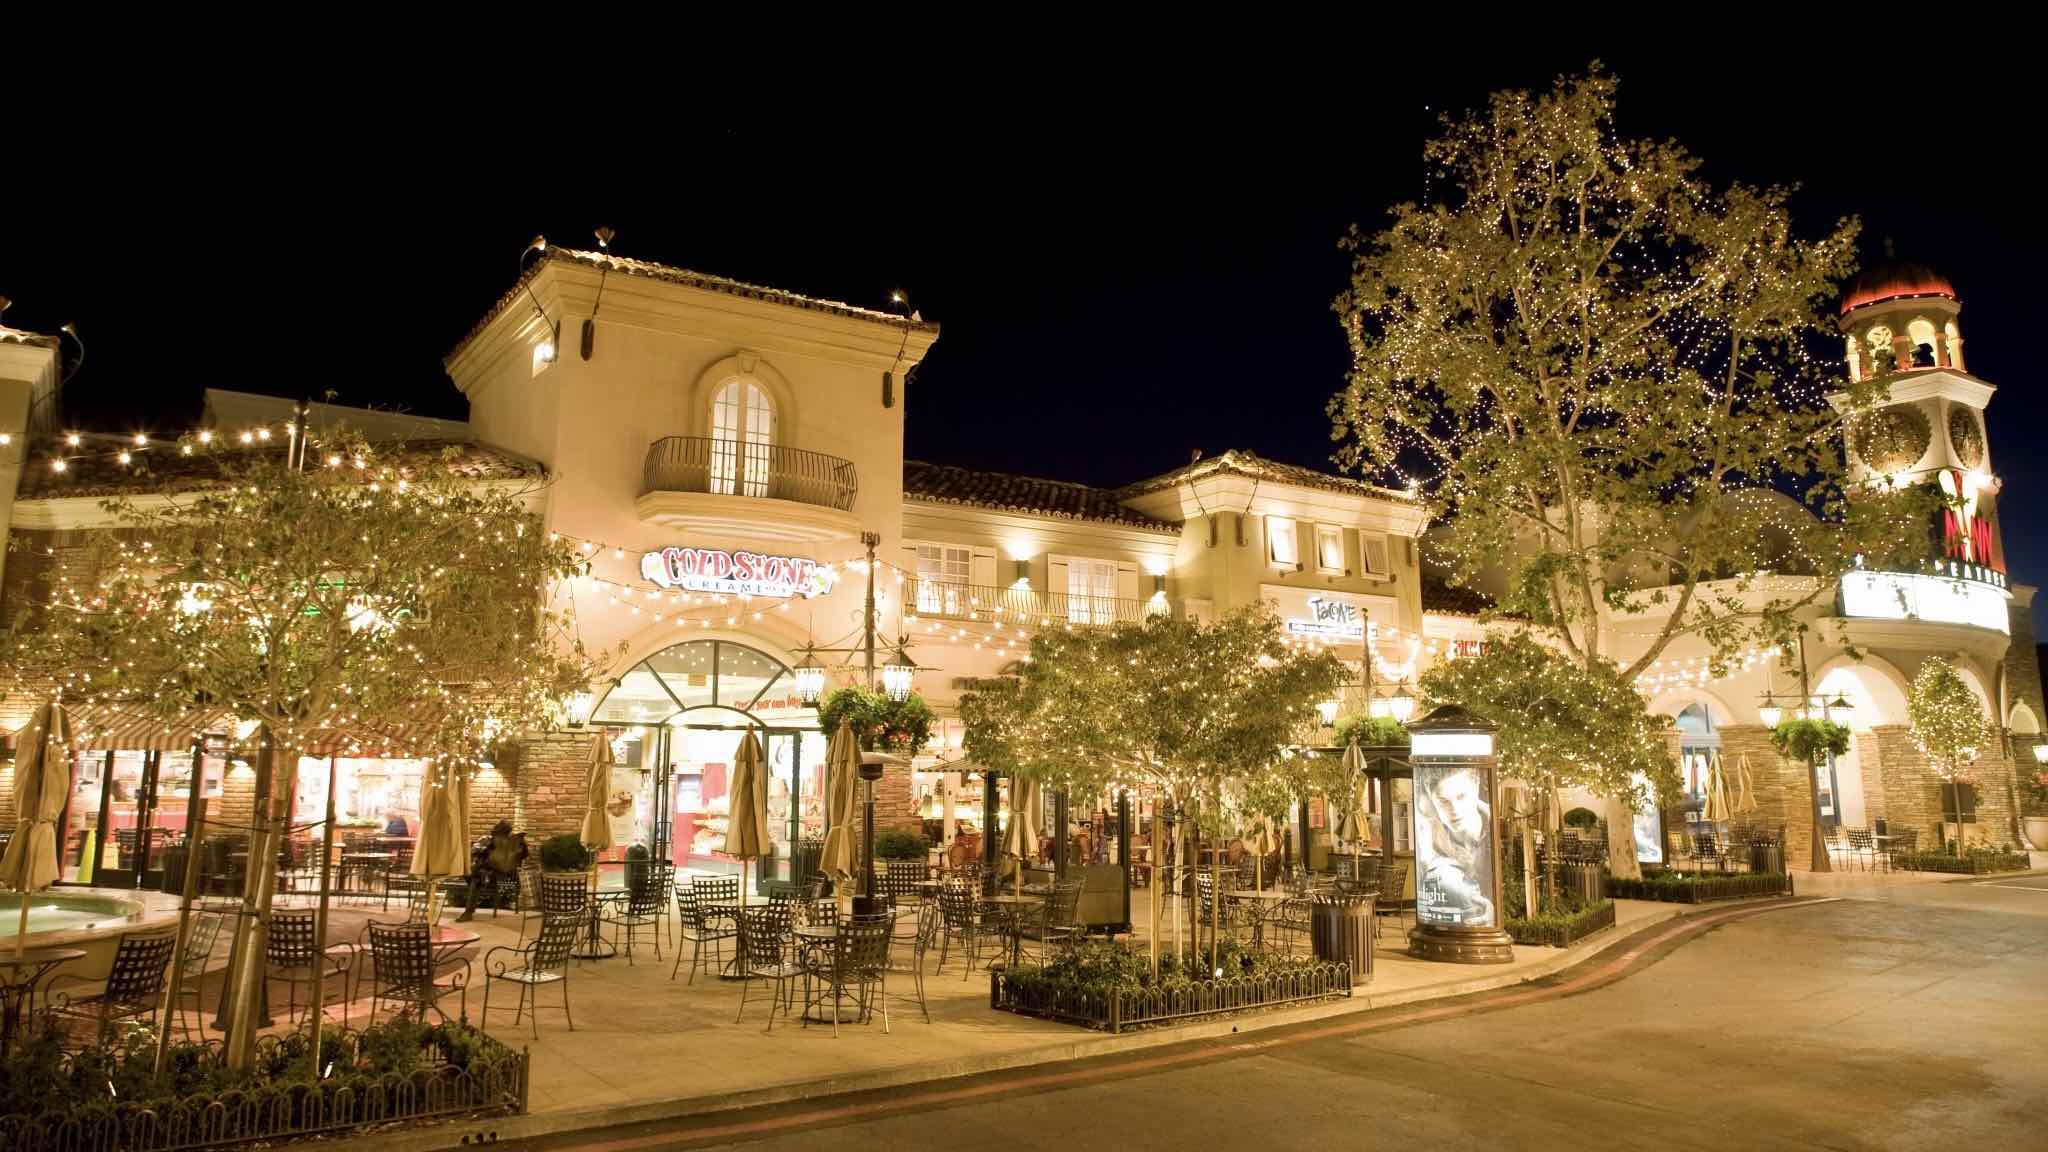 The Promenade luxury shopping is one of the best things to do in Westlake Village at night